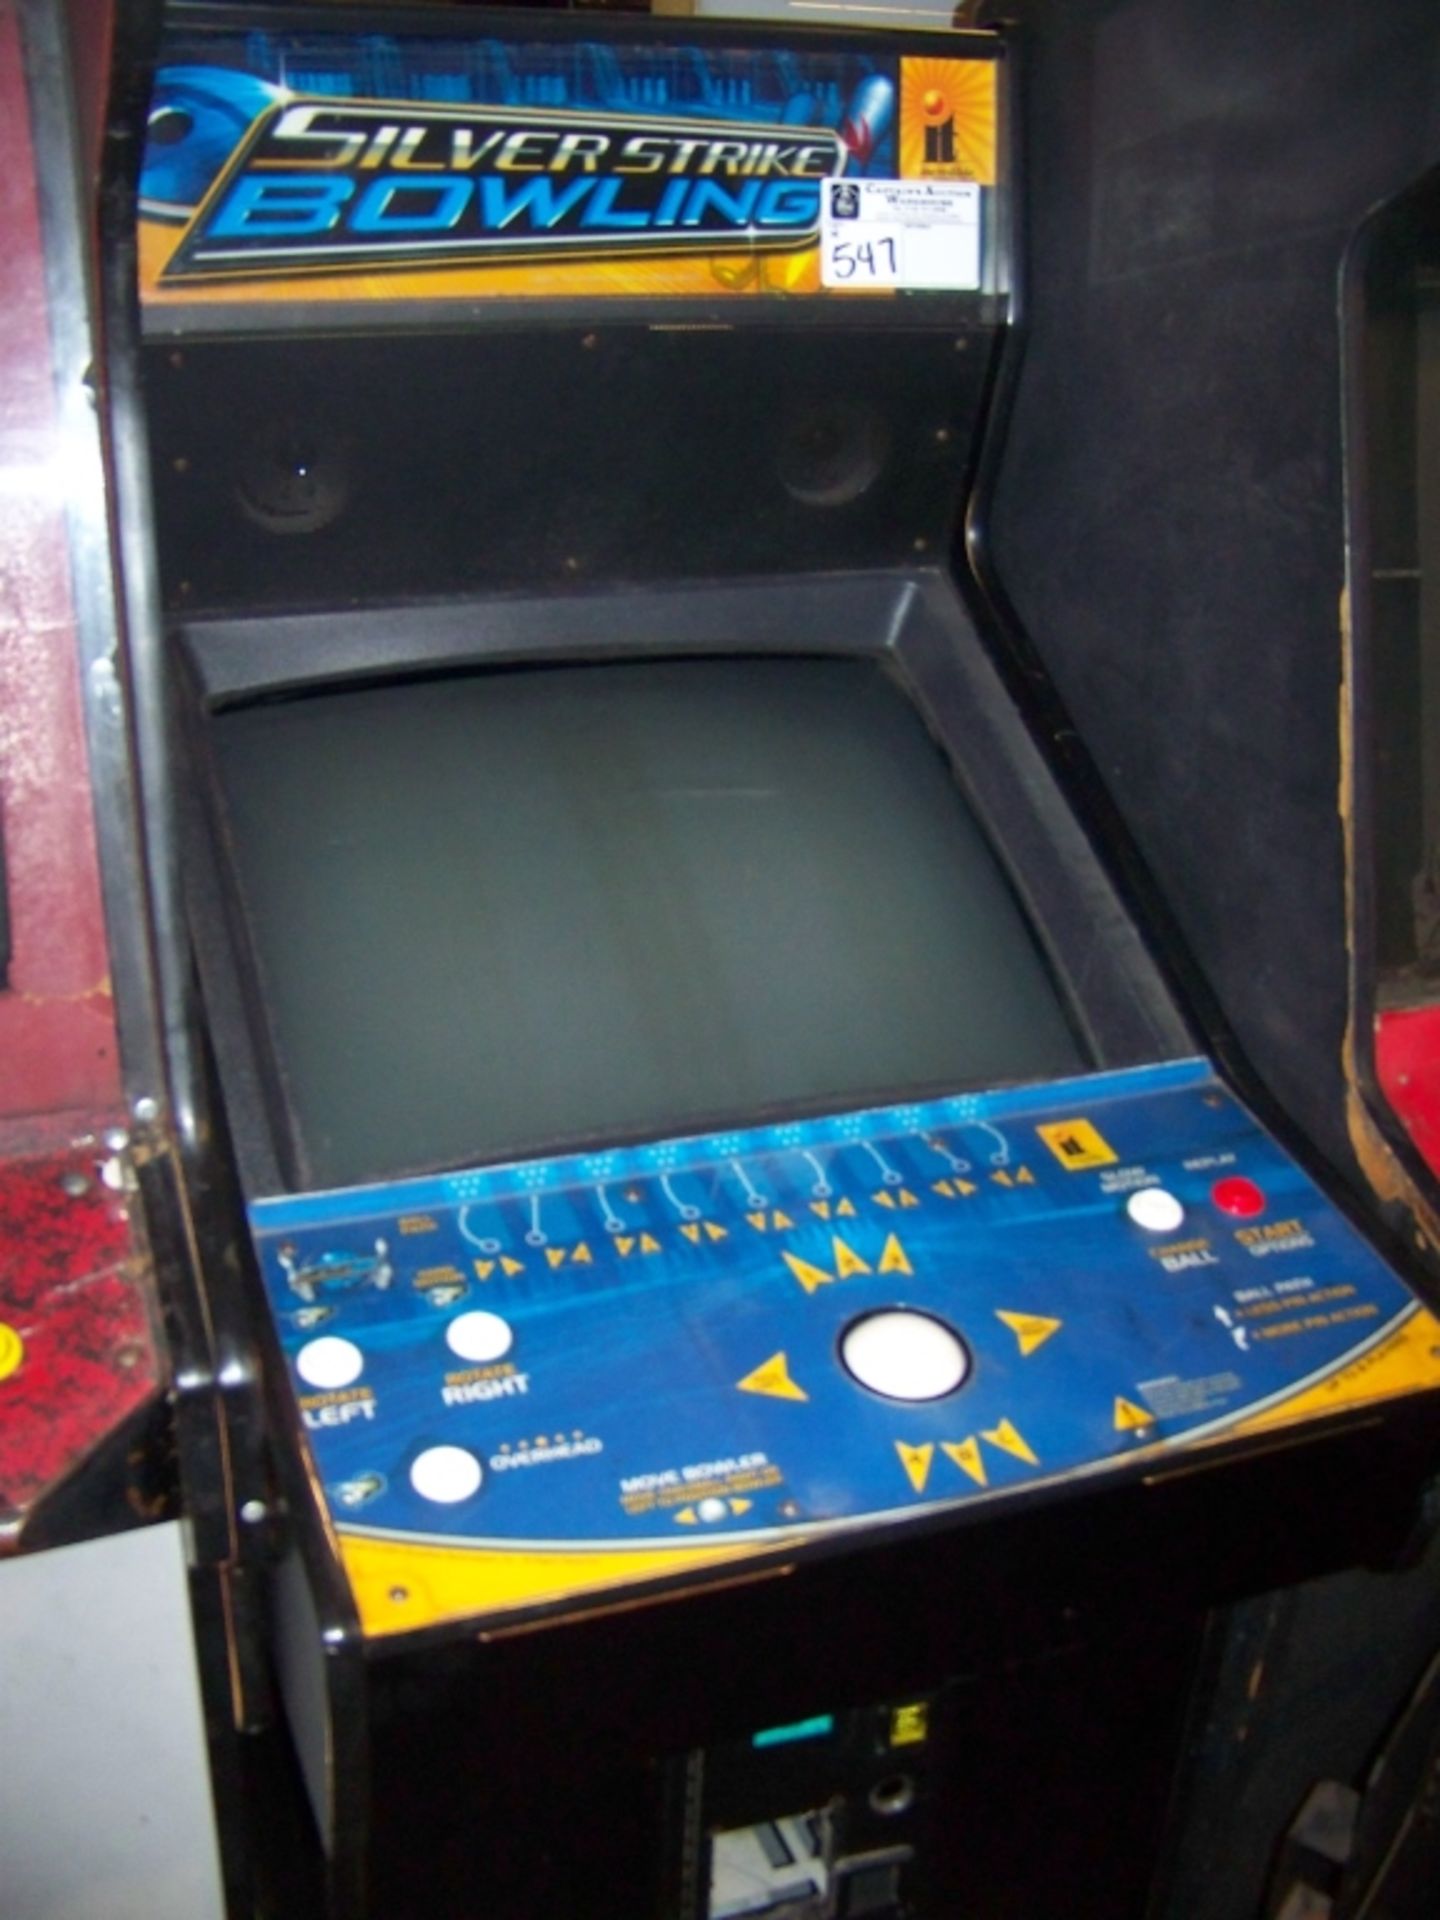 SILVER STRIKE BOWLING ARCADE GAME CABINET ONLY